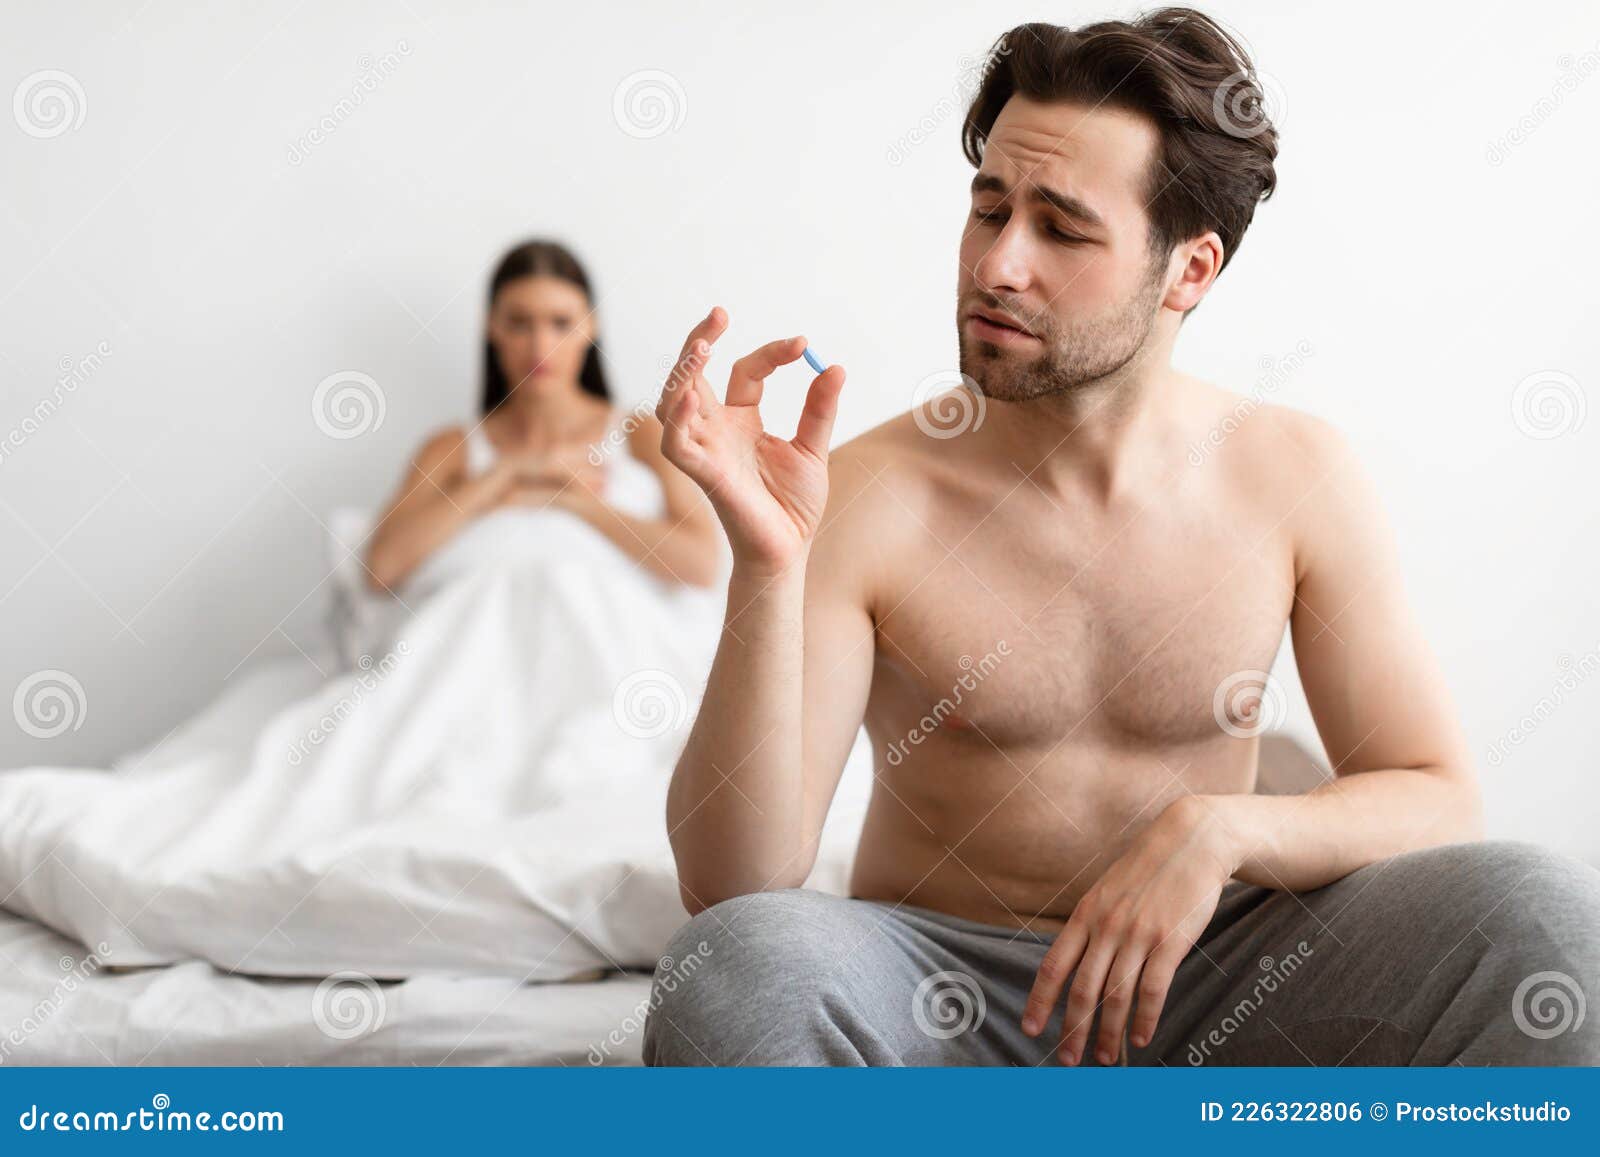 Young Husband Holding Potency Pill before Sex Indoors Stock Photo picture